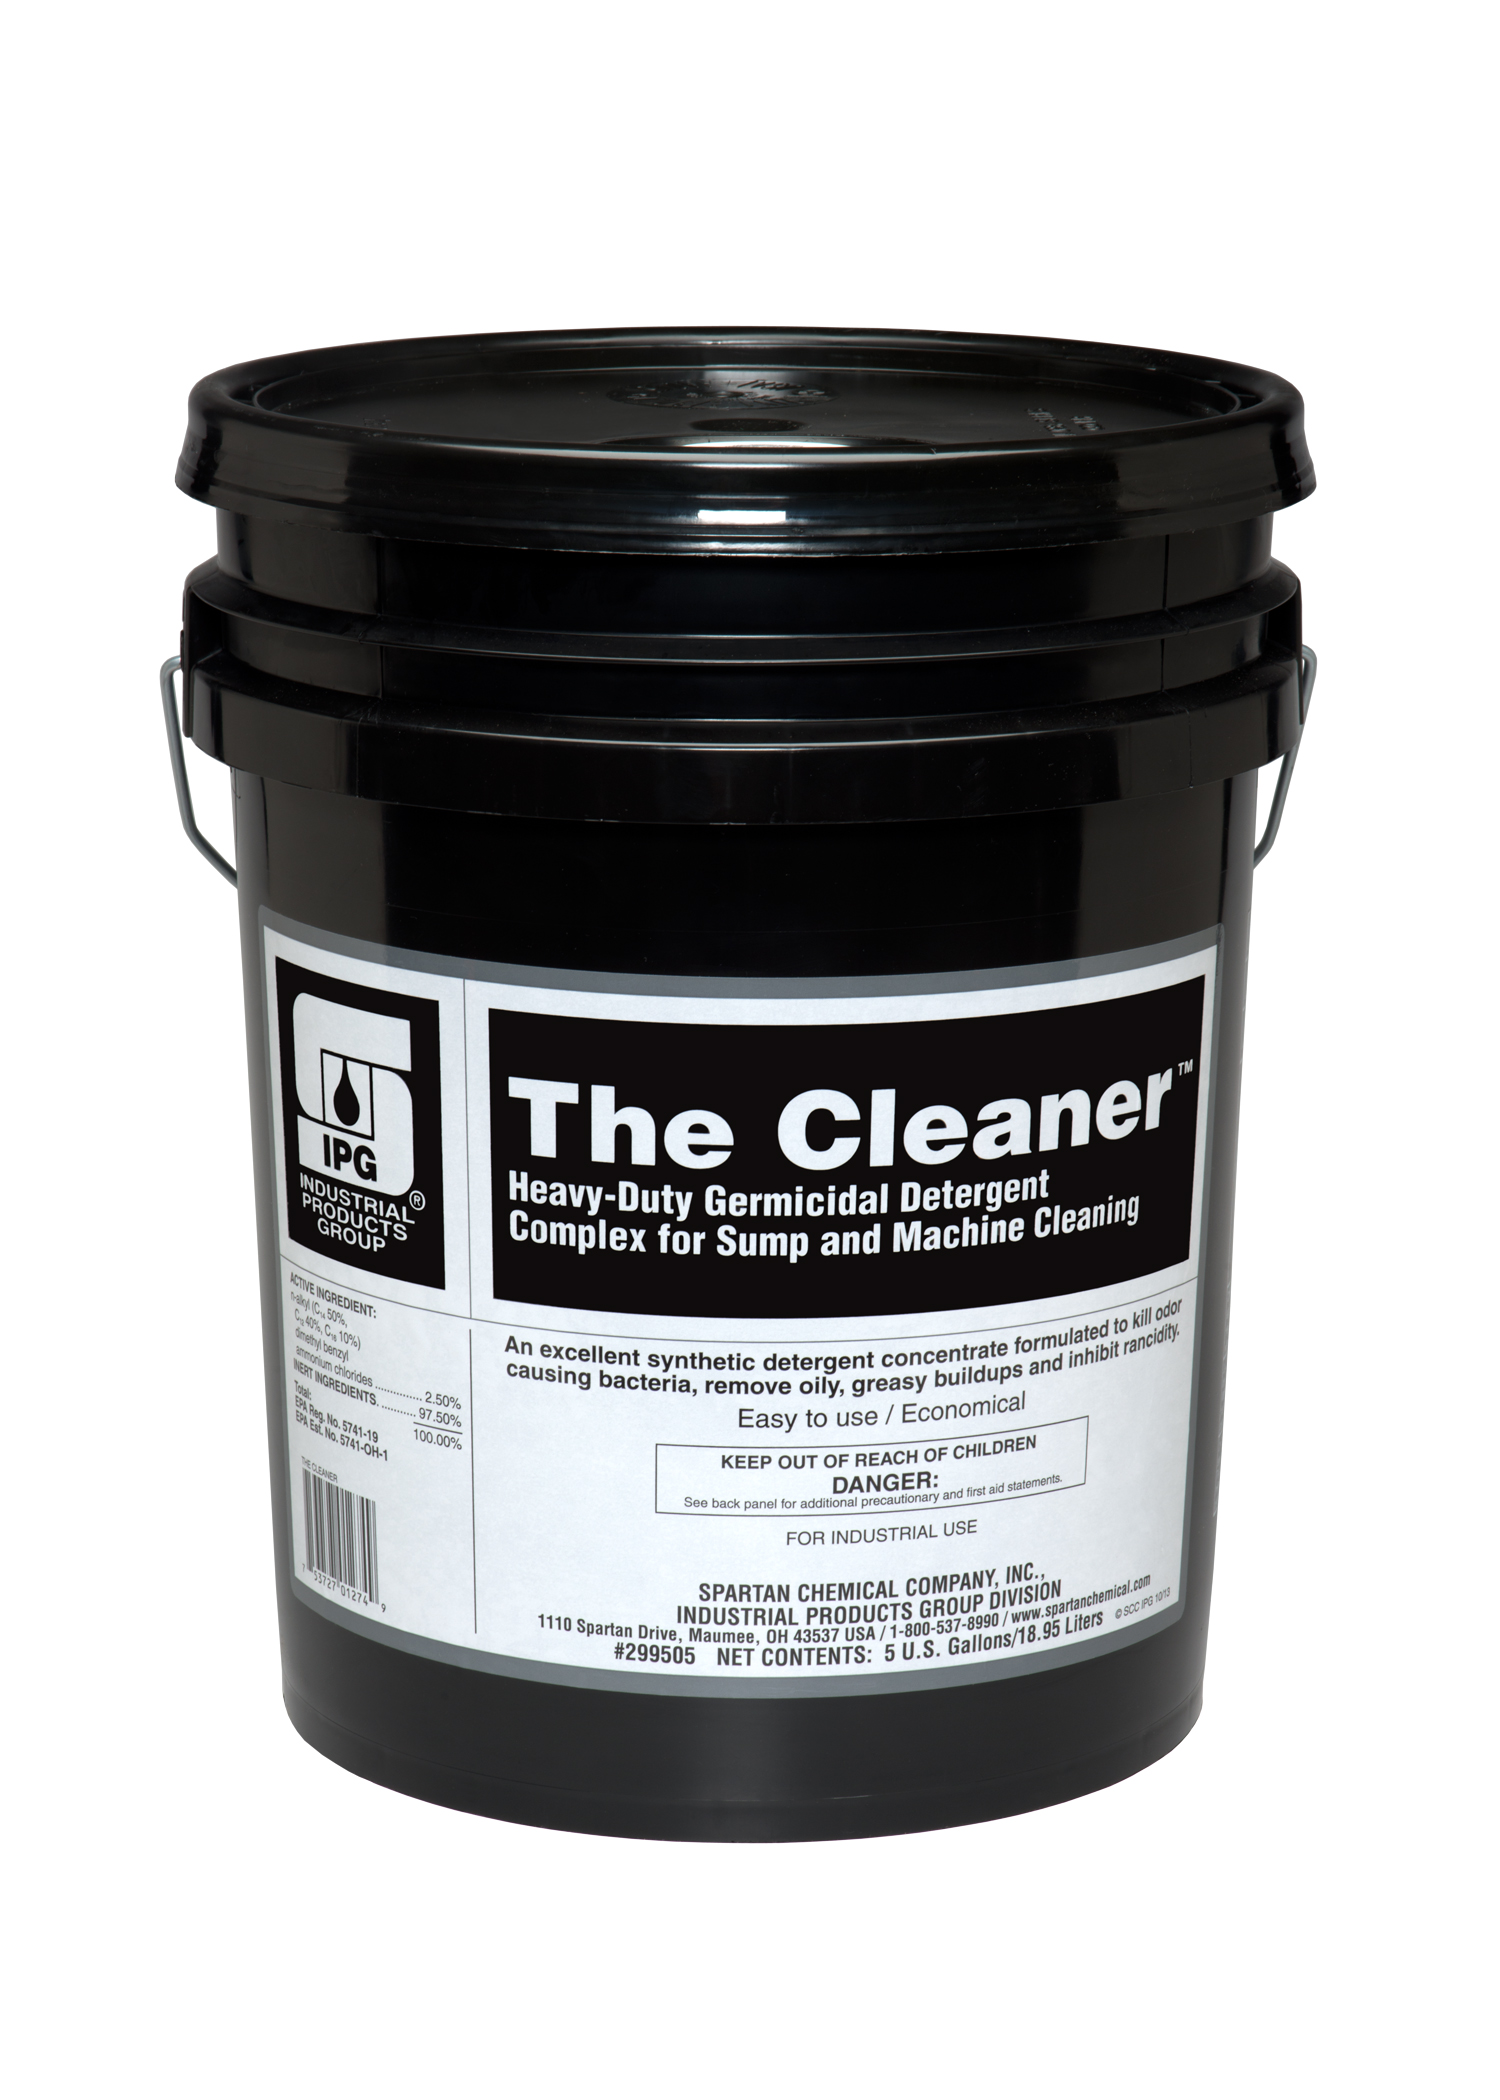 The Cleaner 5 gallon pail